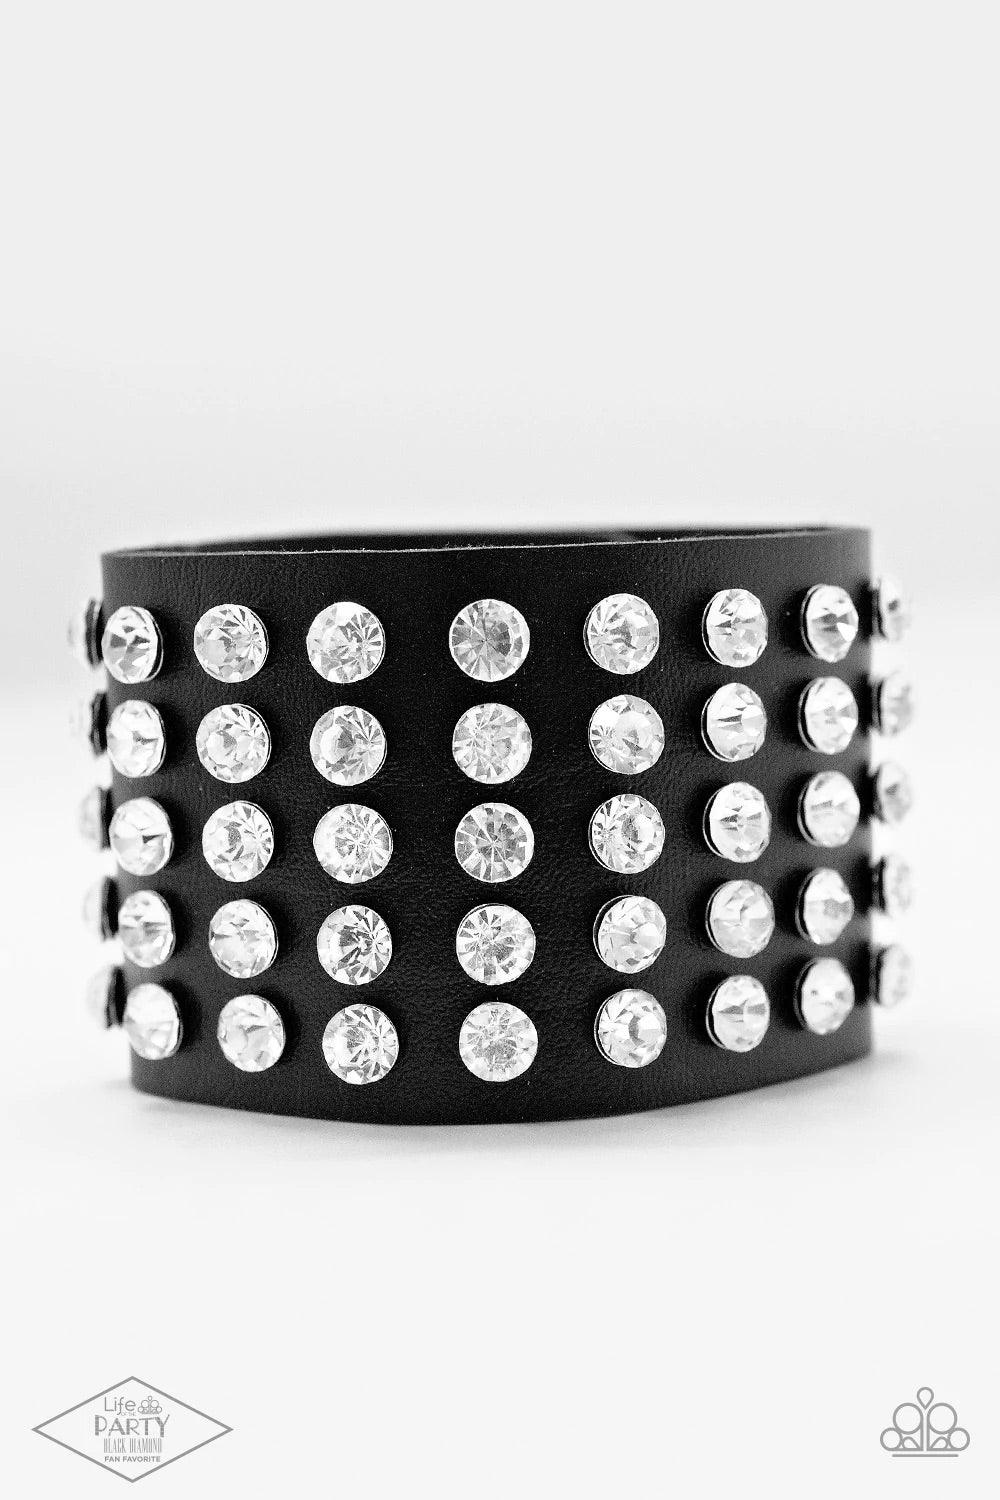 Paparazzi Accessories Mama Said Knock You Out - Black A chunky band of black leather is embellished with rows and rows of sparkling white rhinestones. With some urban edge and undeniable shimmer, the unified sparkle creates a bold centerpiece. Features an